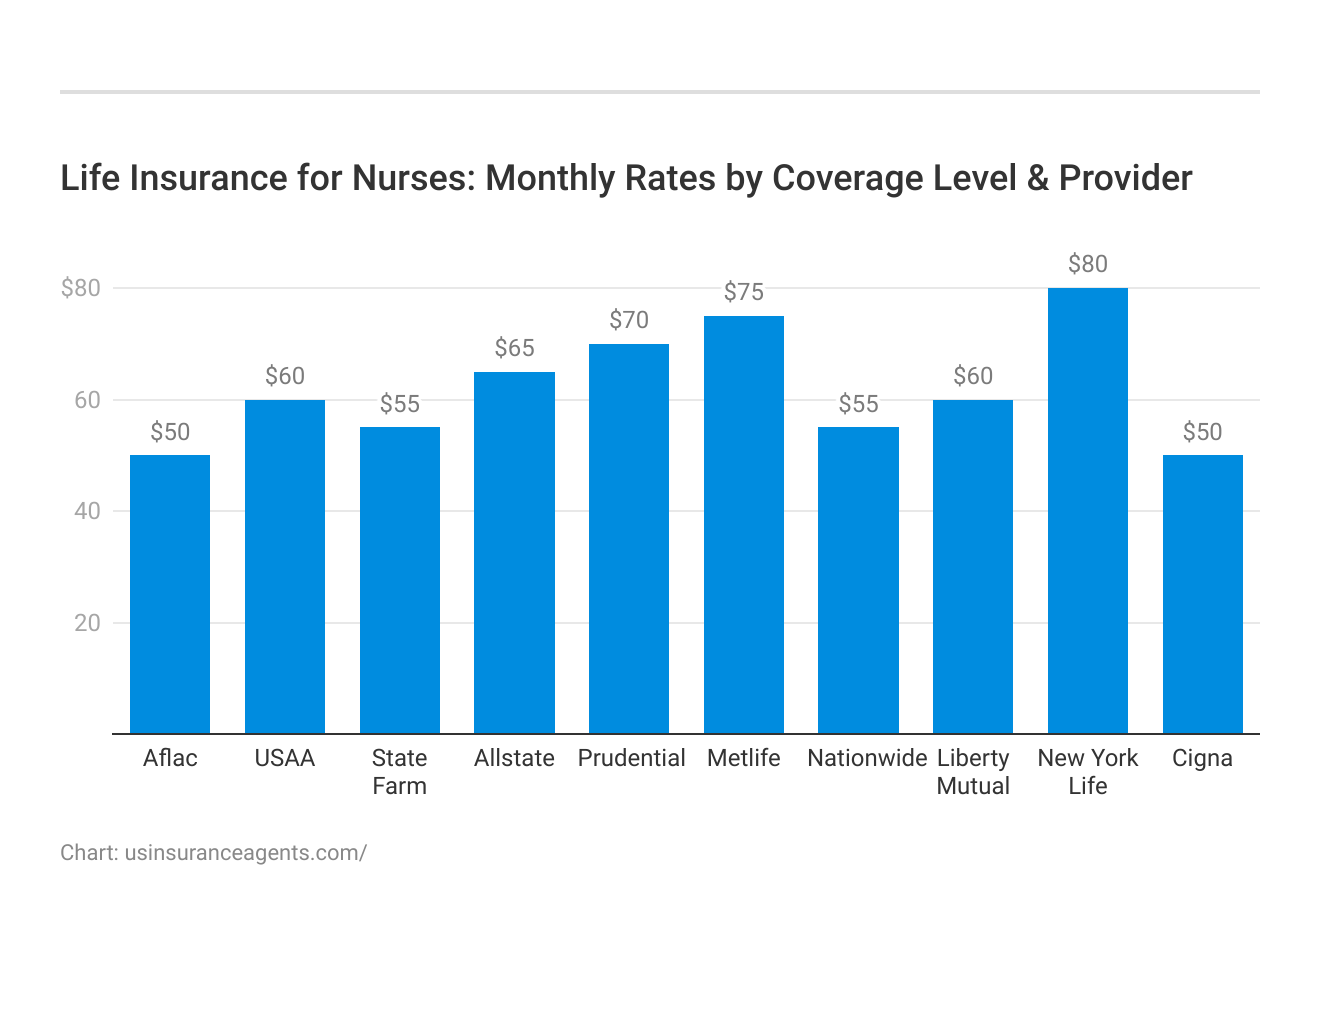 <h3>Life Insurance for Nurses: Monthly Rates by Coverage Level & Provider</h3>